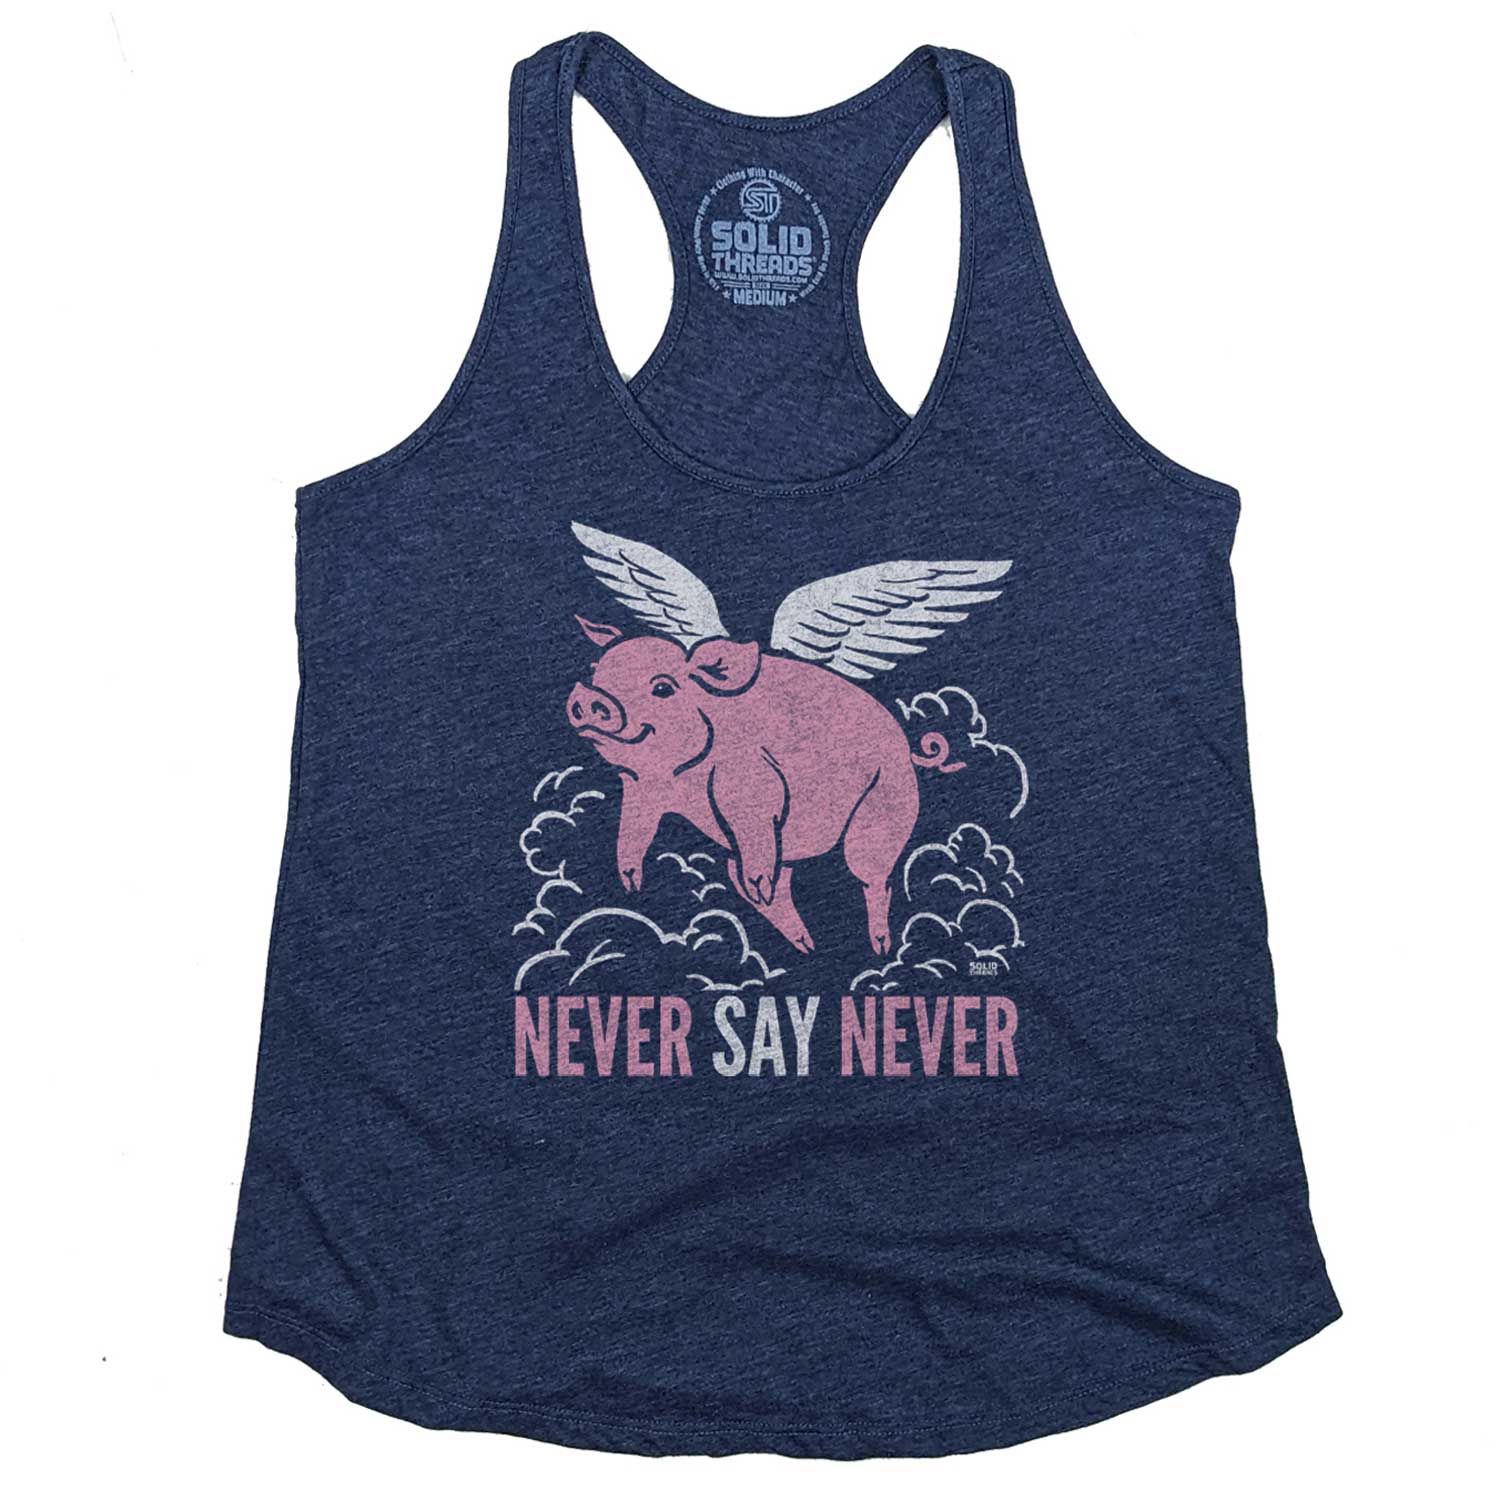 Women's Never Say Never Vintage Graphic Tank Top | Funny Pig T-shirt | Solid Threads